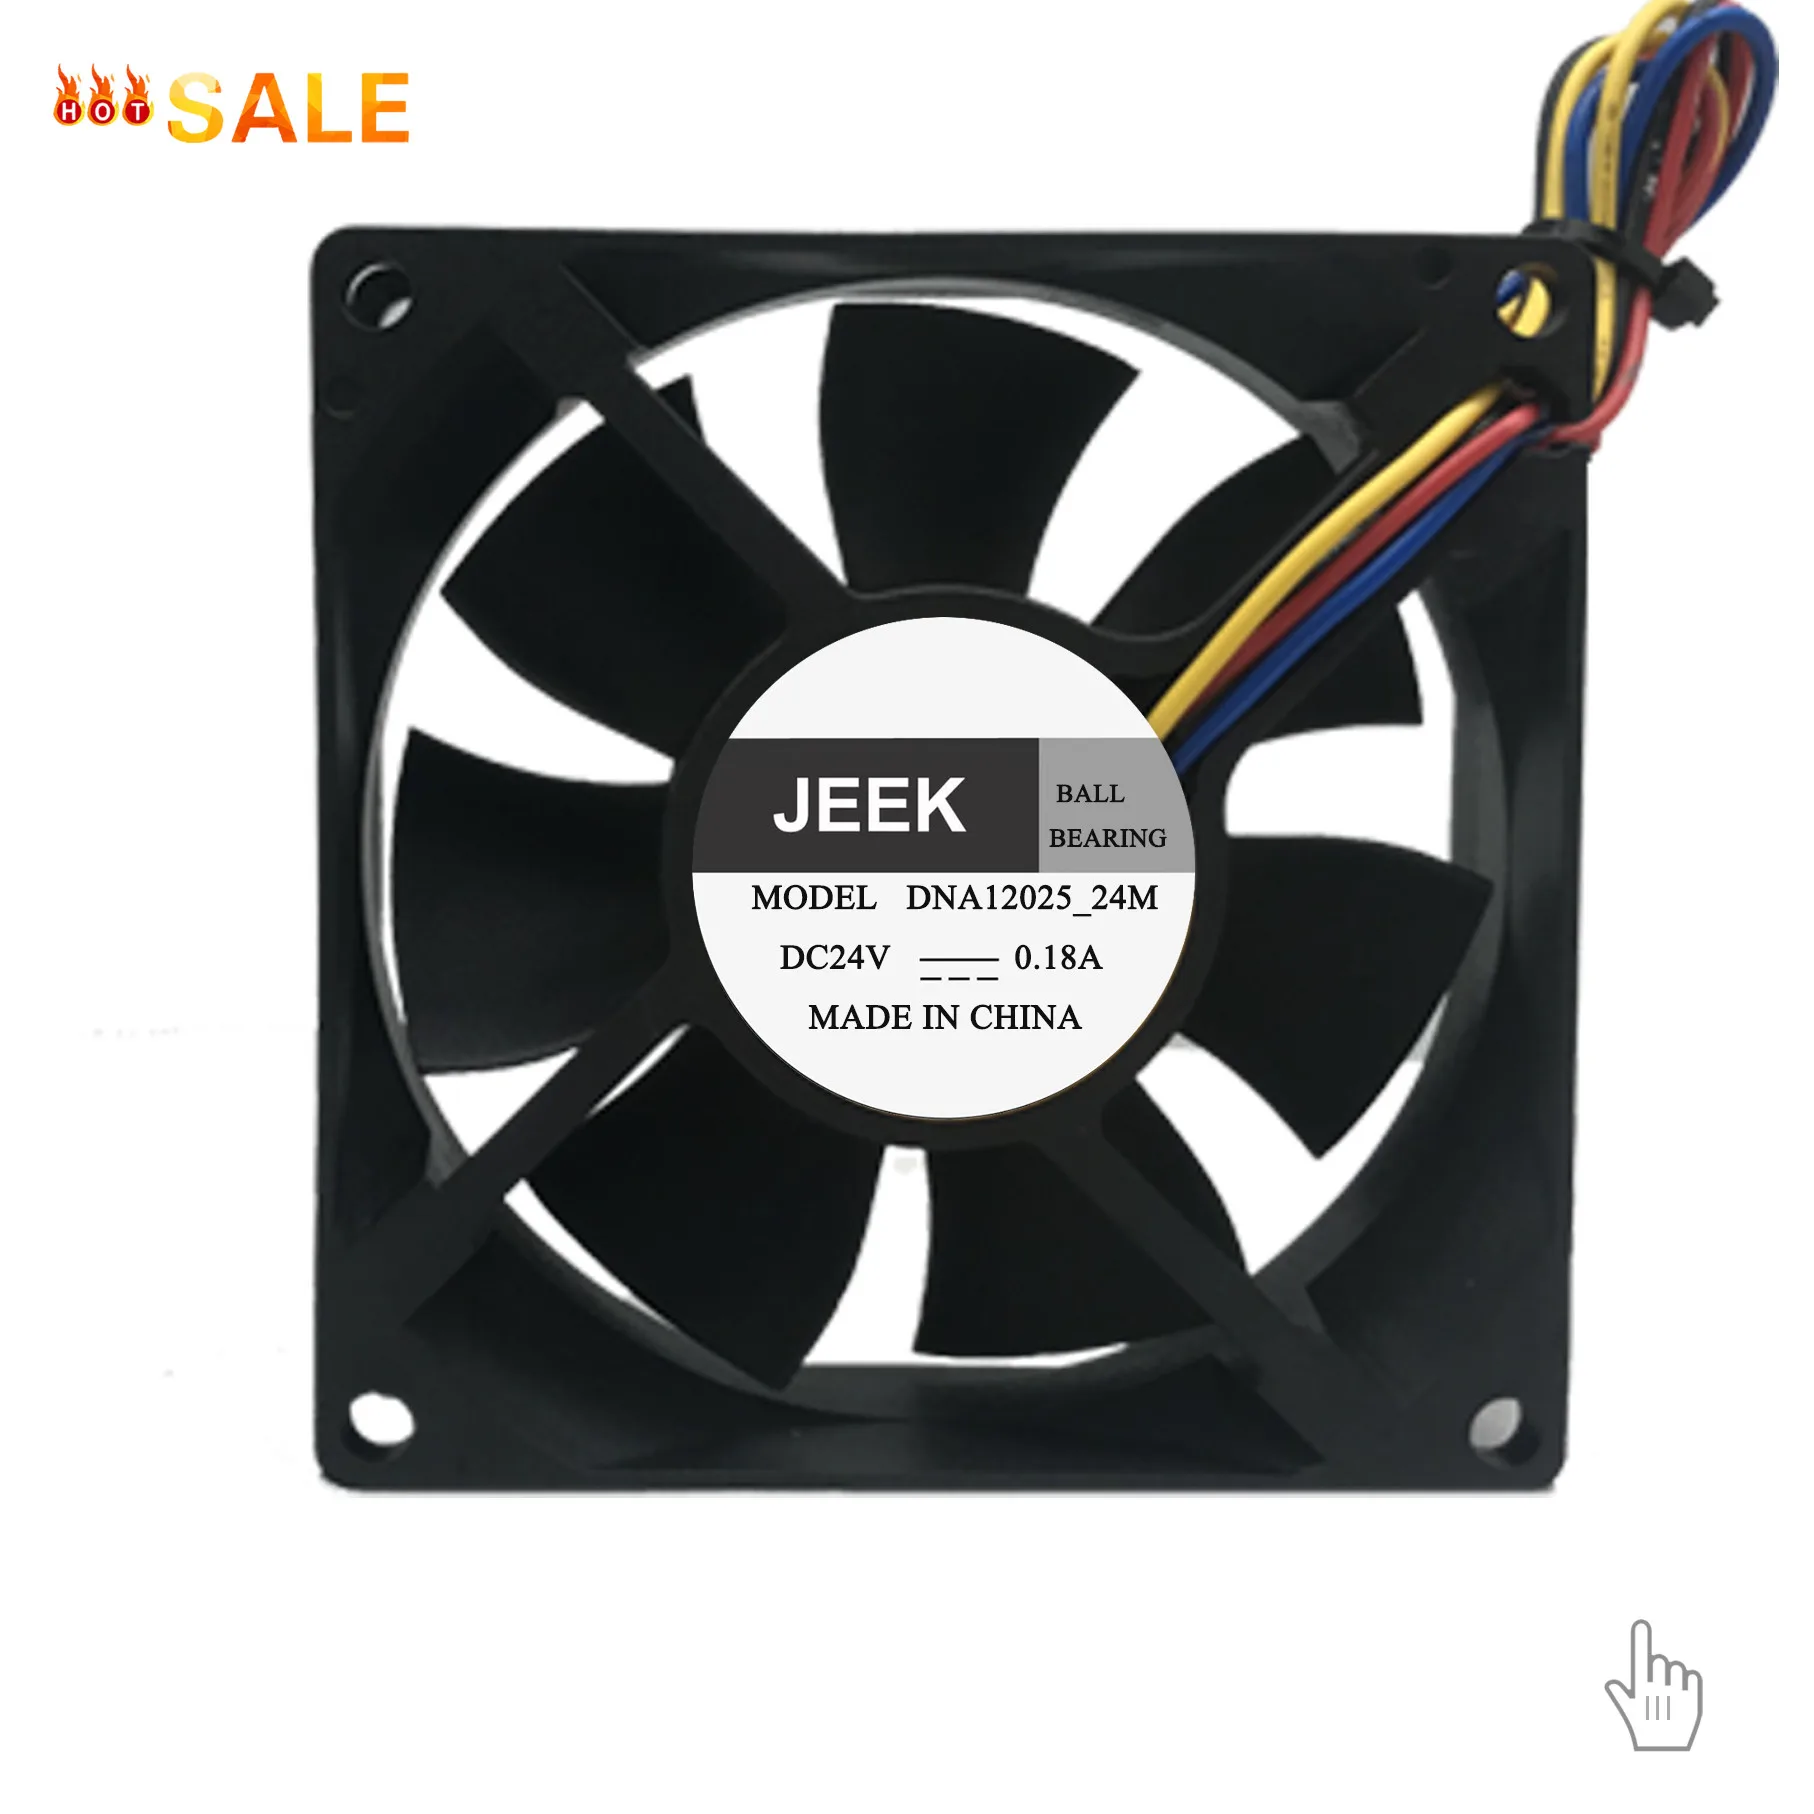 

Free shipping 12025 DC server fan 12V 120mm computer case fan air circulating exhaust brushless industrial high CFM cooling fan